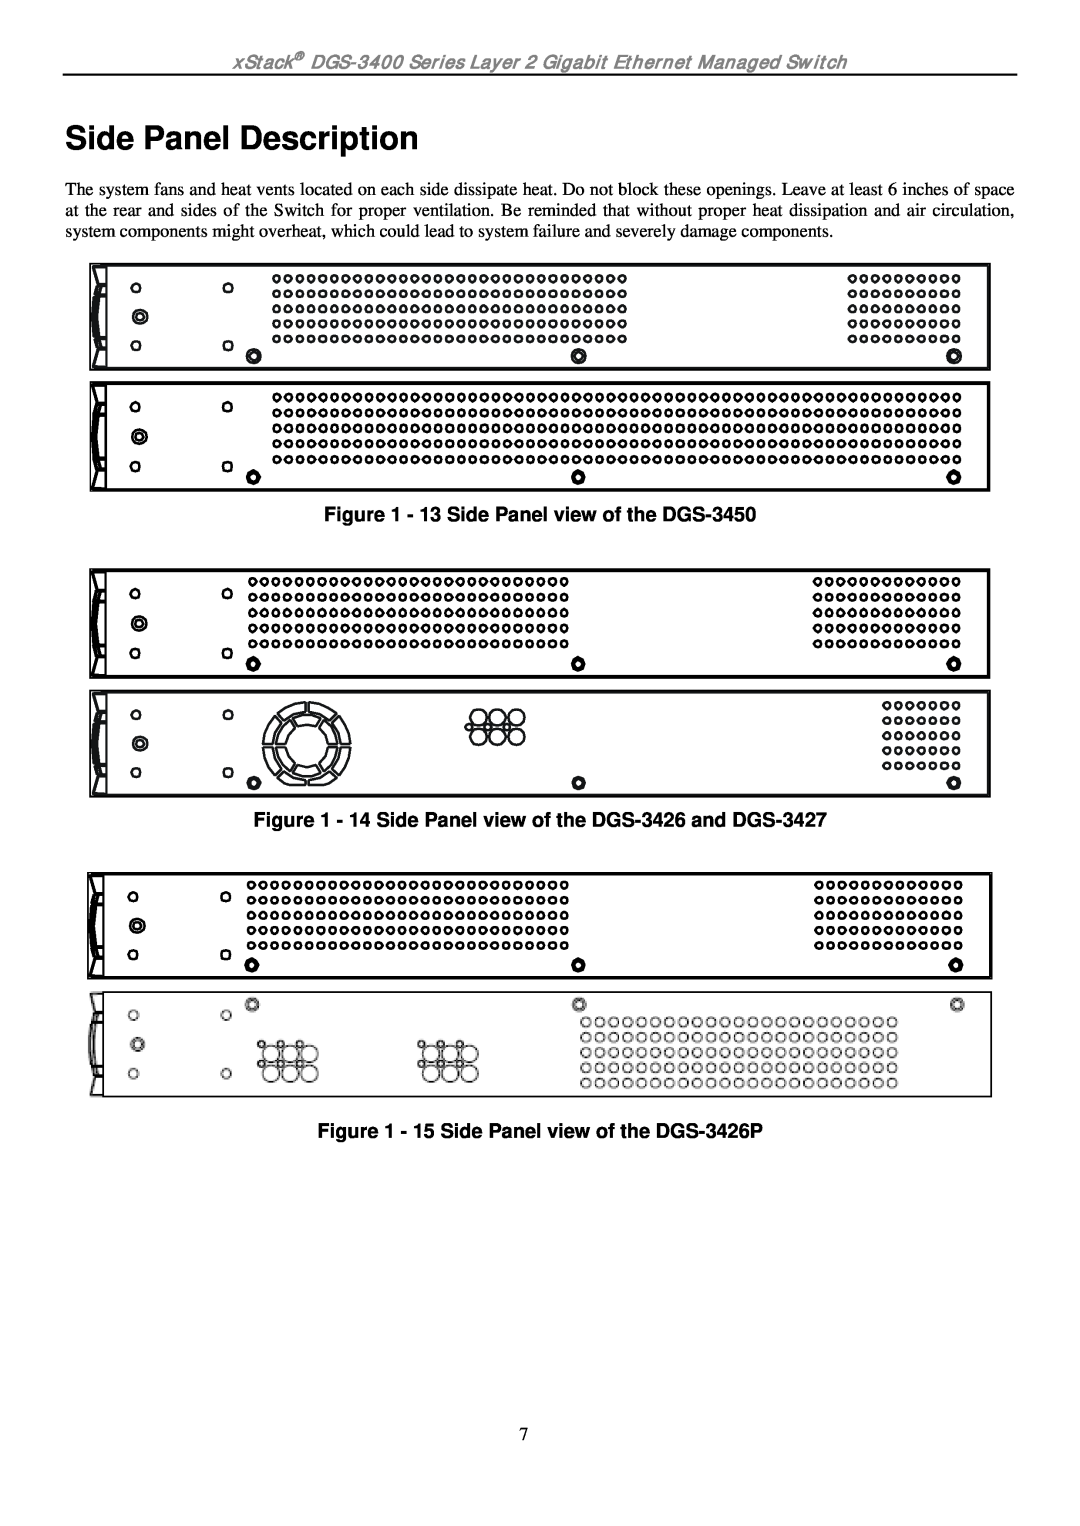 D-Link ethernet managed switch manual Side Panel Description, 13 Side Panel view of the DGS-3450 